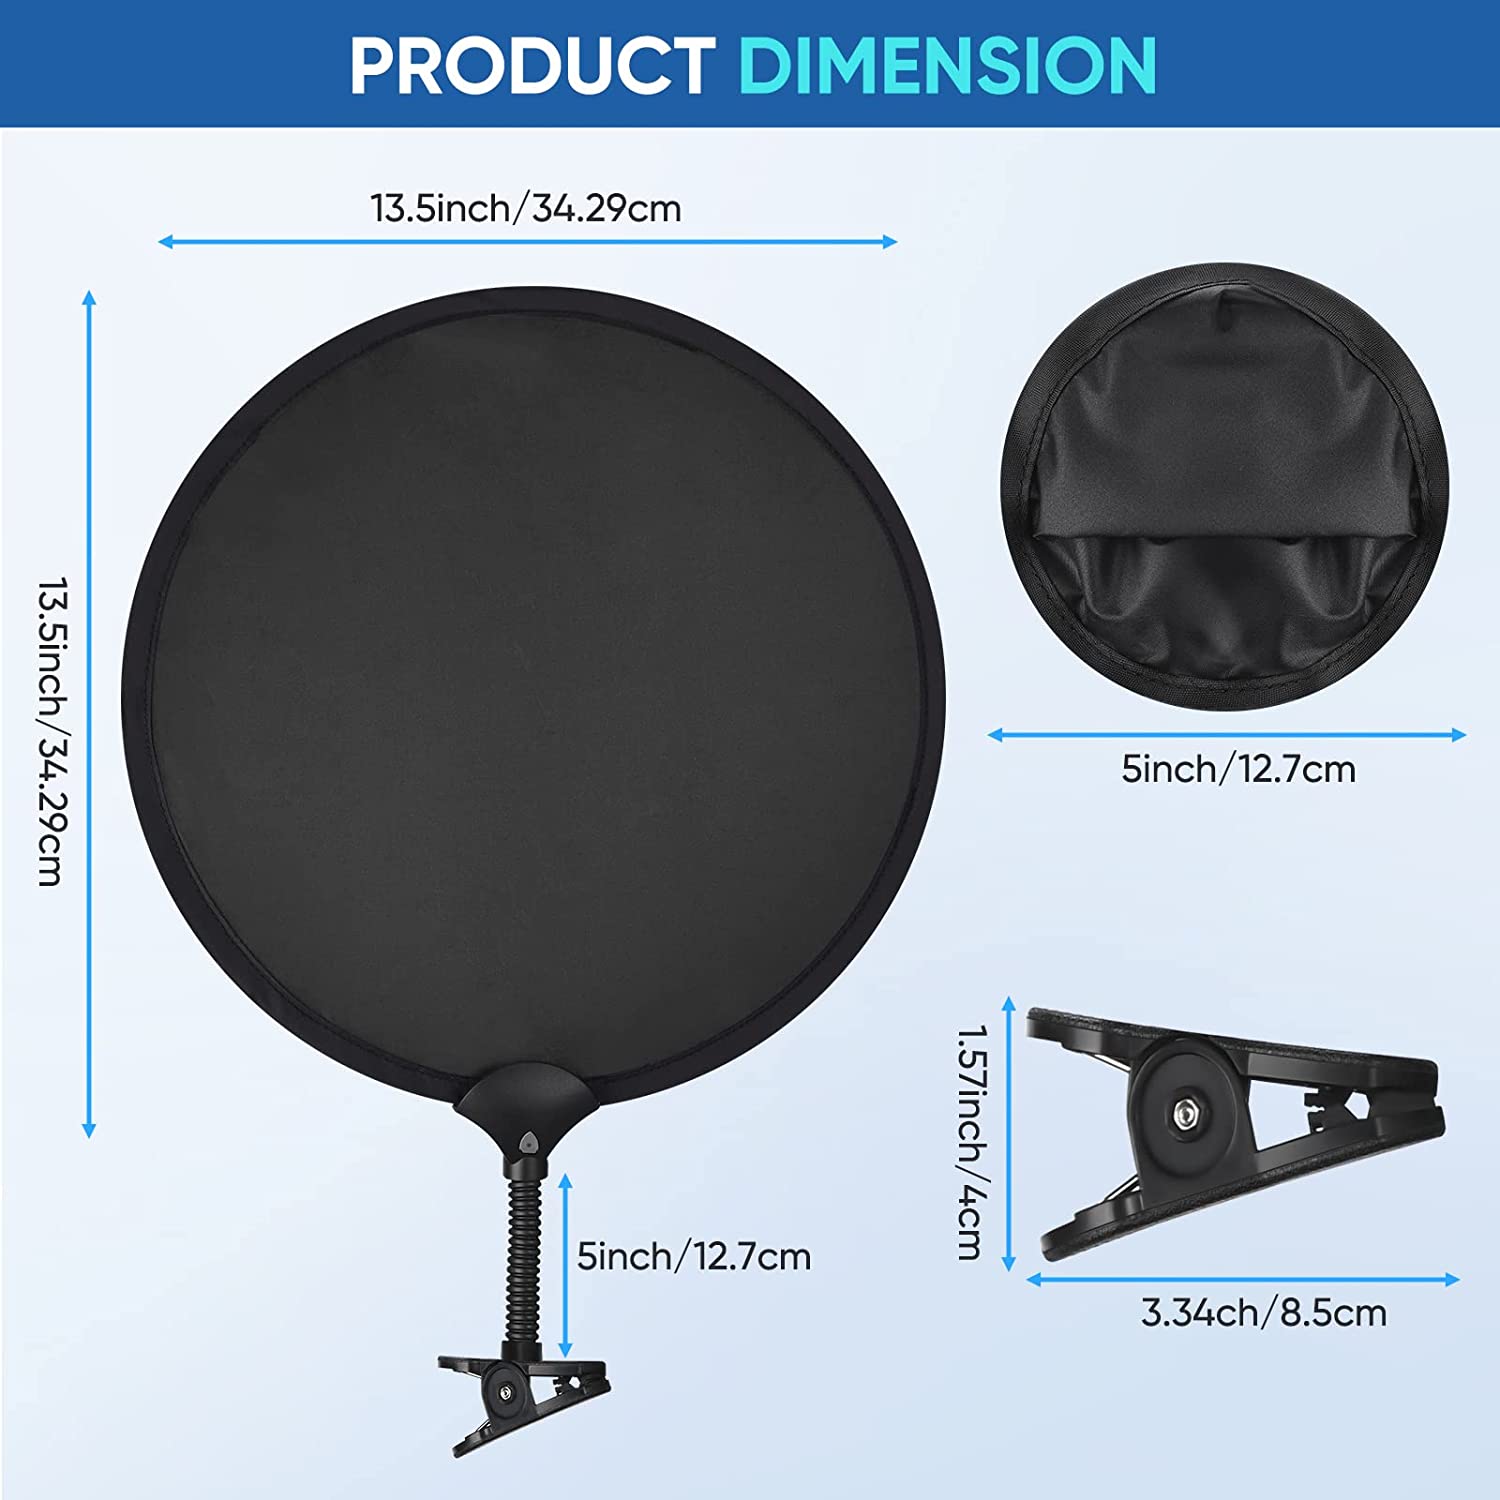 ZZM Portable Laptop Sun Shade with Adjustable Clip, Foldable Cubicle Shade for Working Outside Laptop Sun Shield for Computers Beach Chairs and Strollers